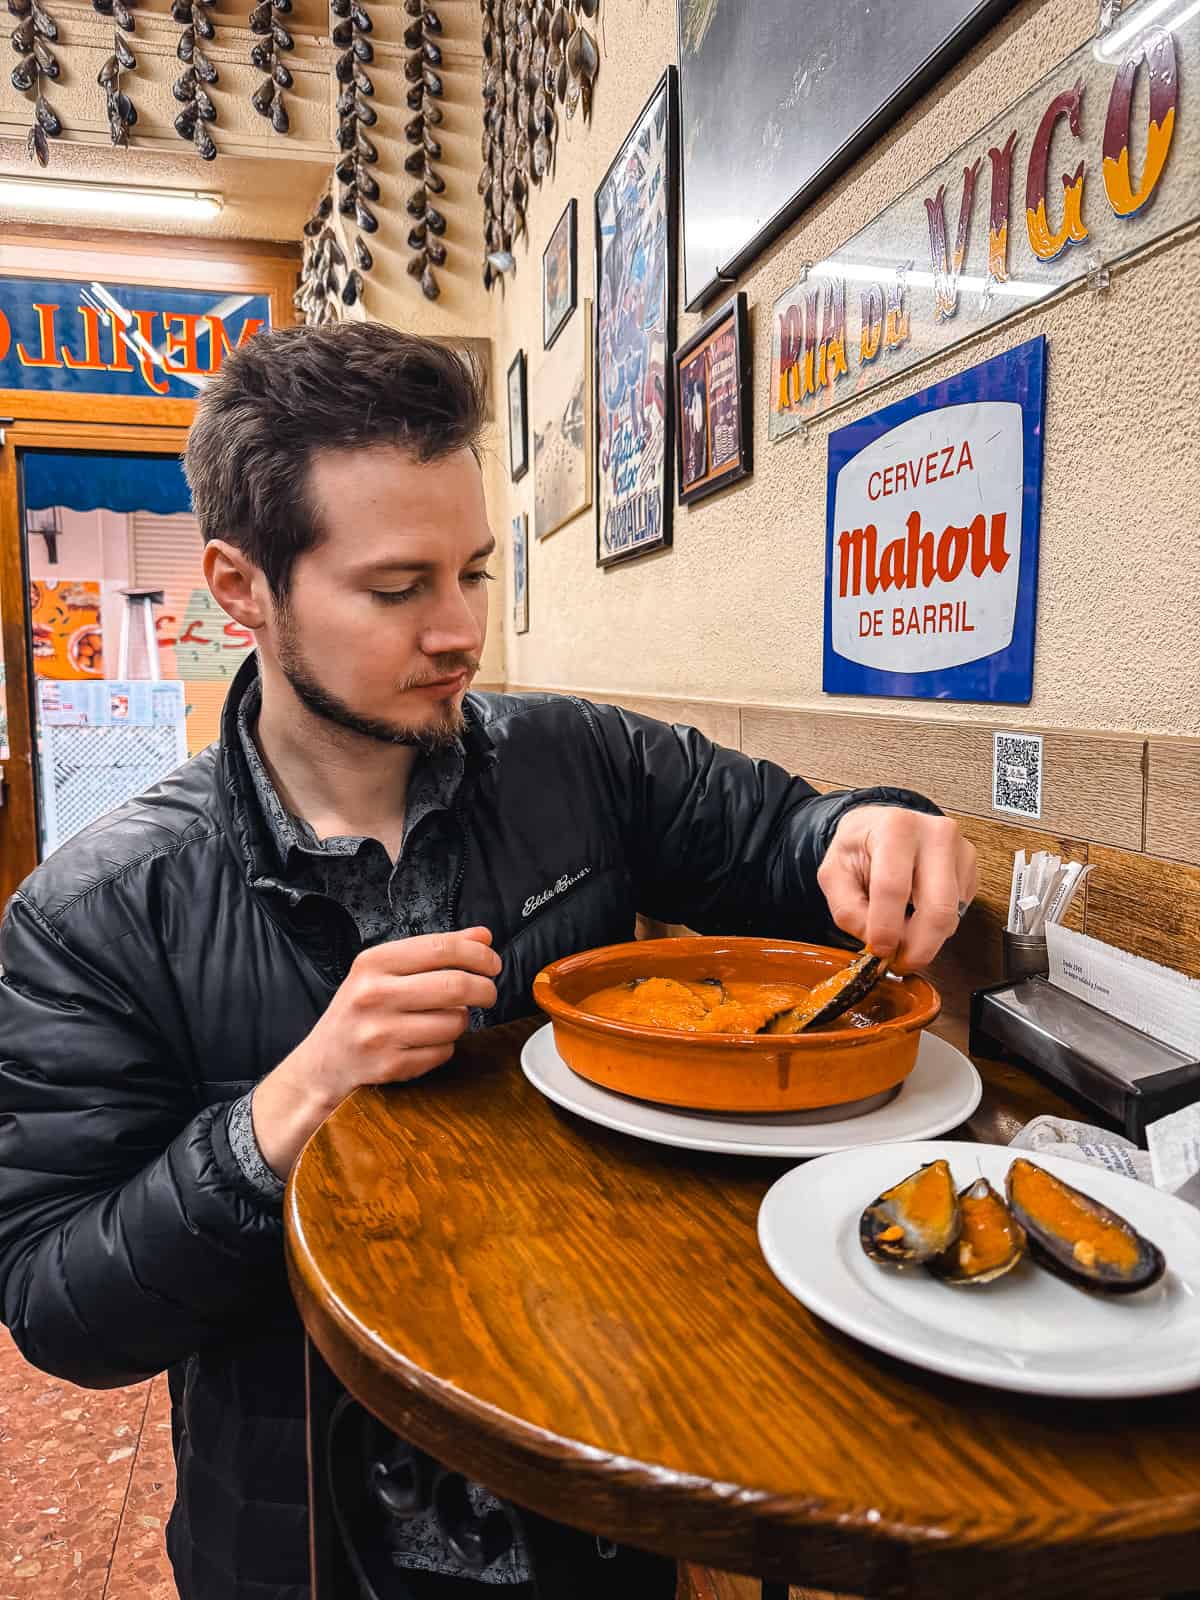 A man in a black jacket is focused on eating a bowl of orange stew, with mussels on a side plate, at a bar decorated with hanging garlic strings and a Mahou beer sign.